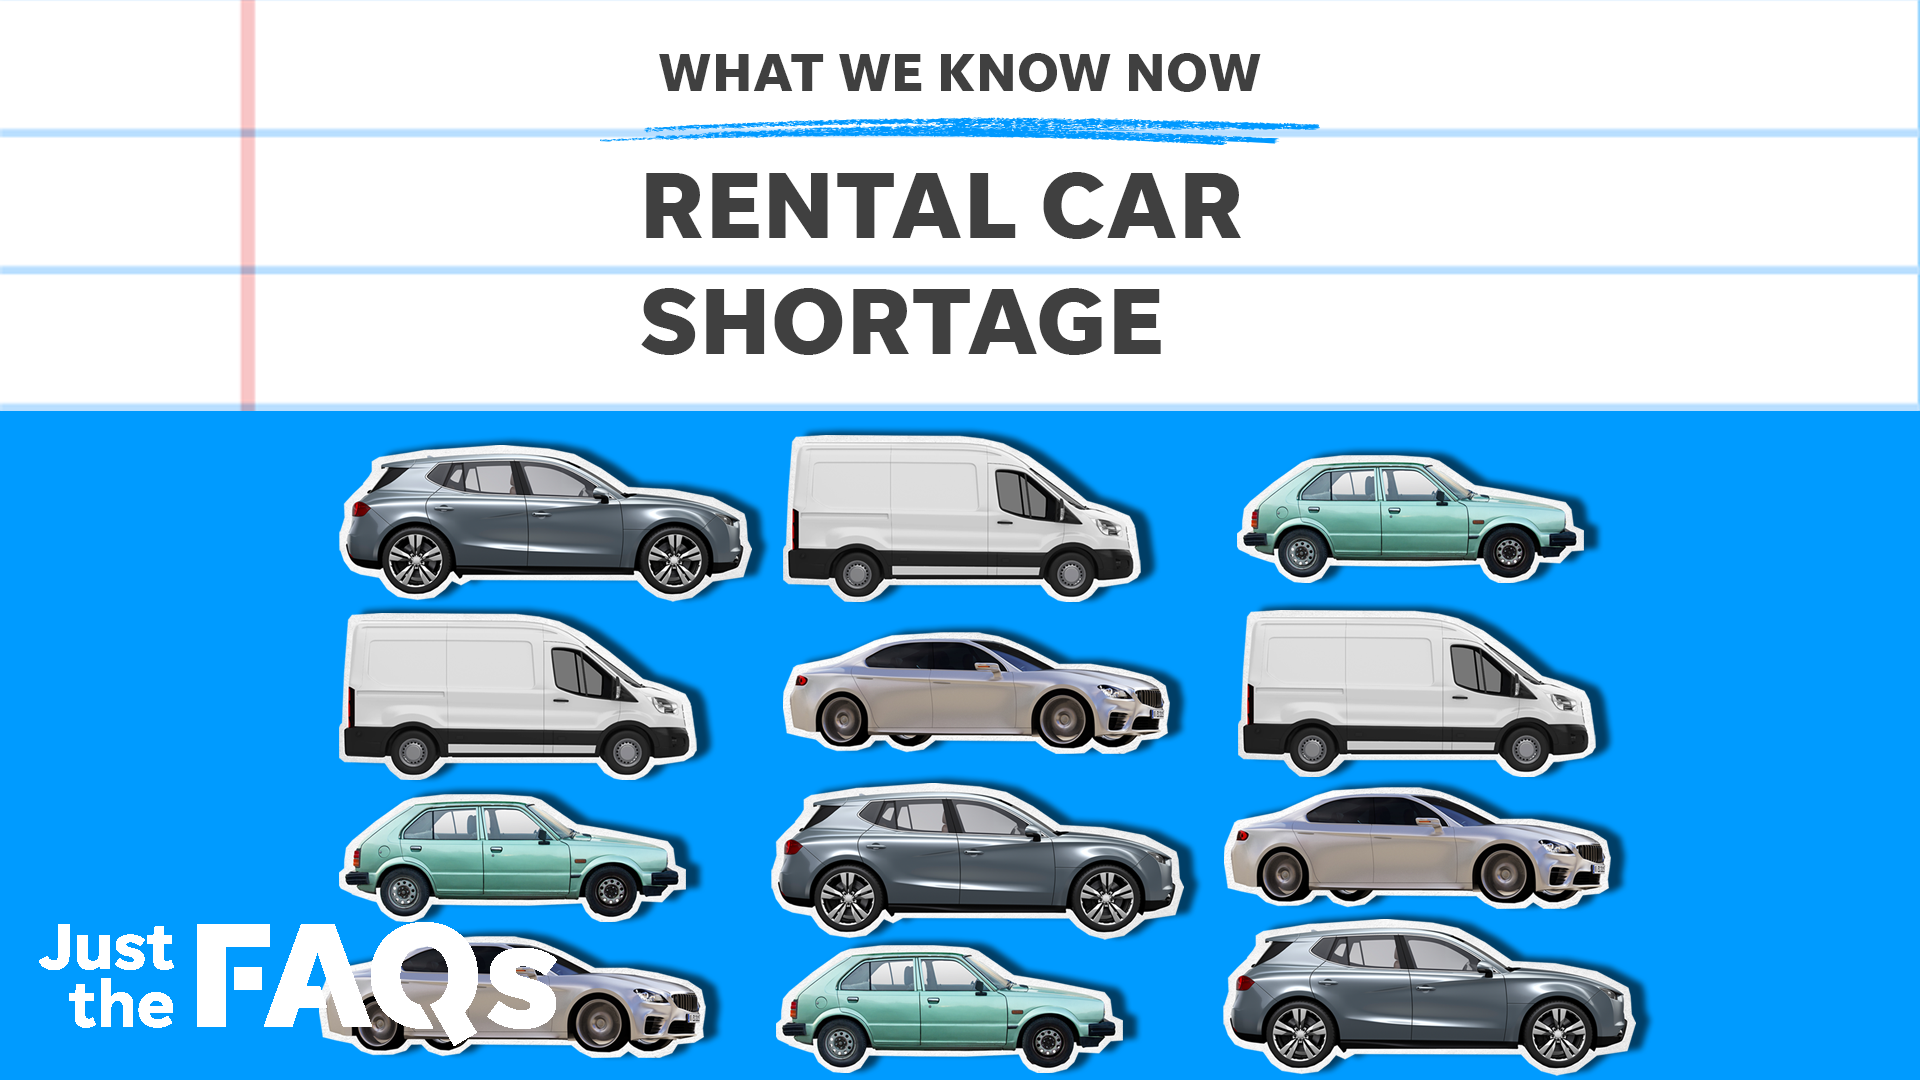 Rental cars: Why there's a shortage and why prices are skyrocketing this summer